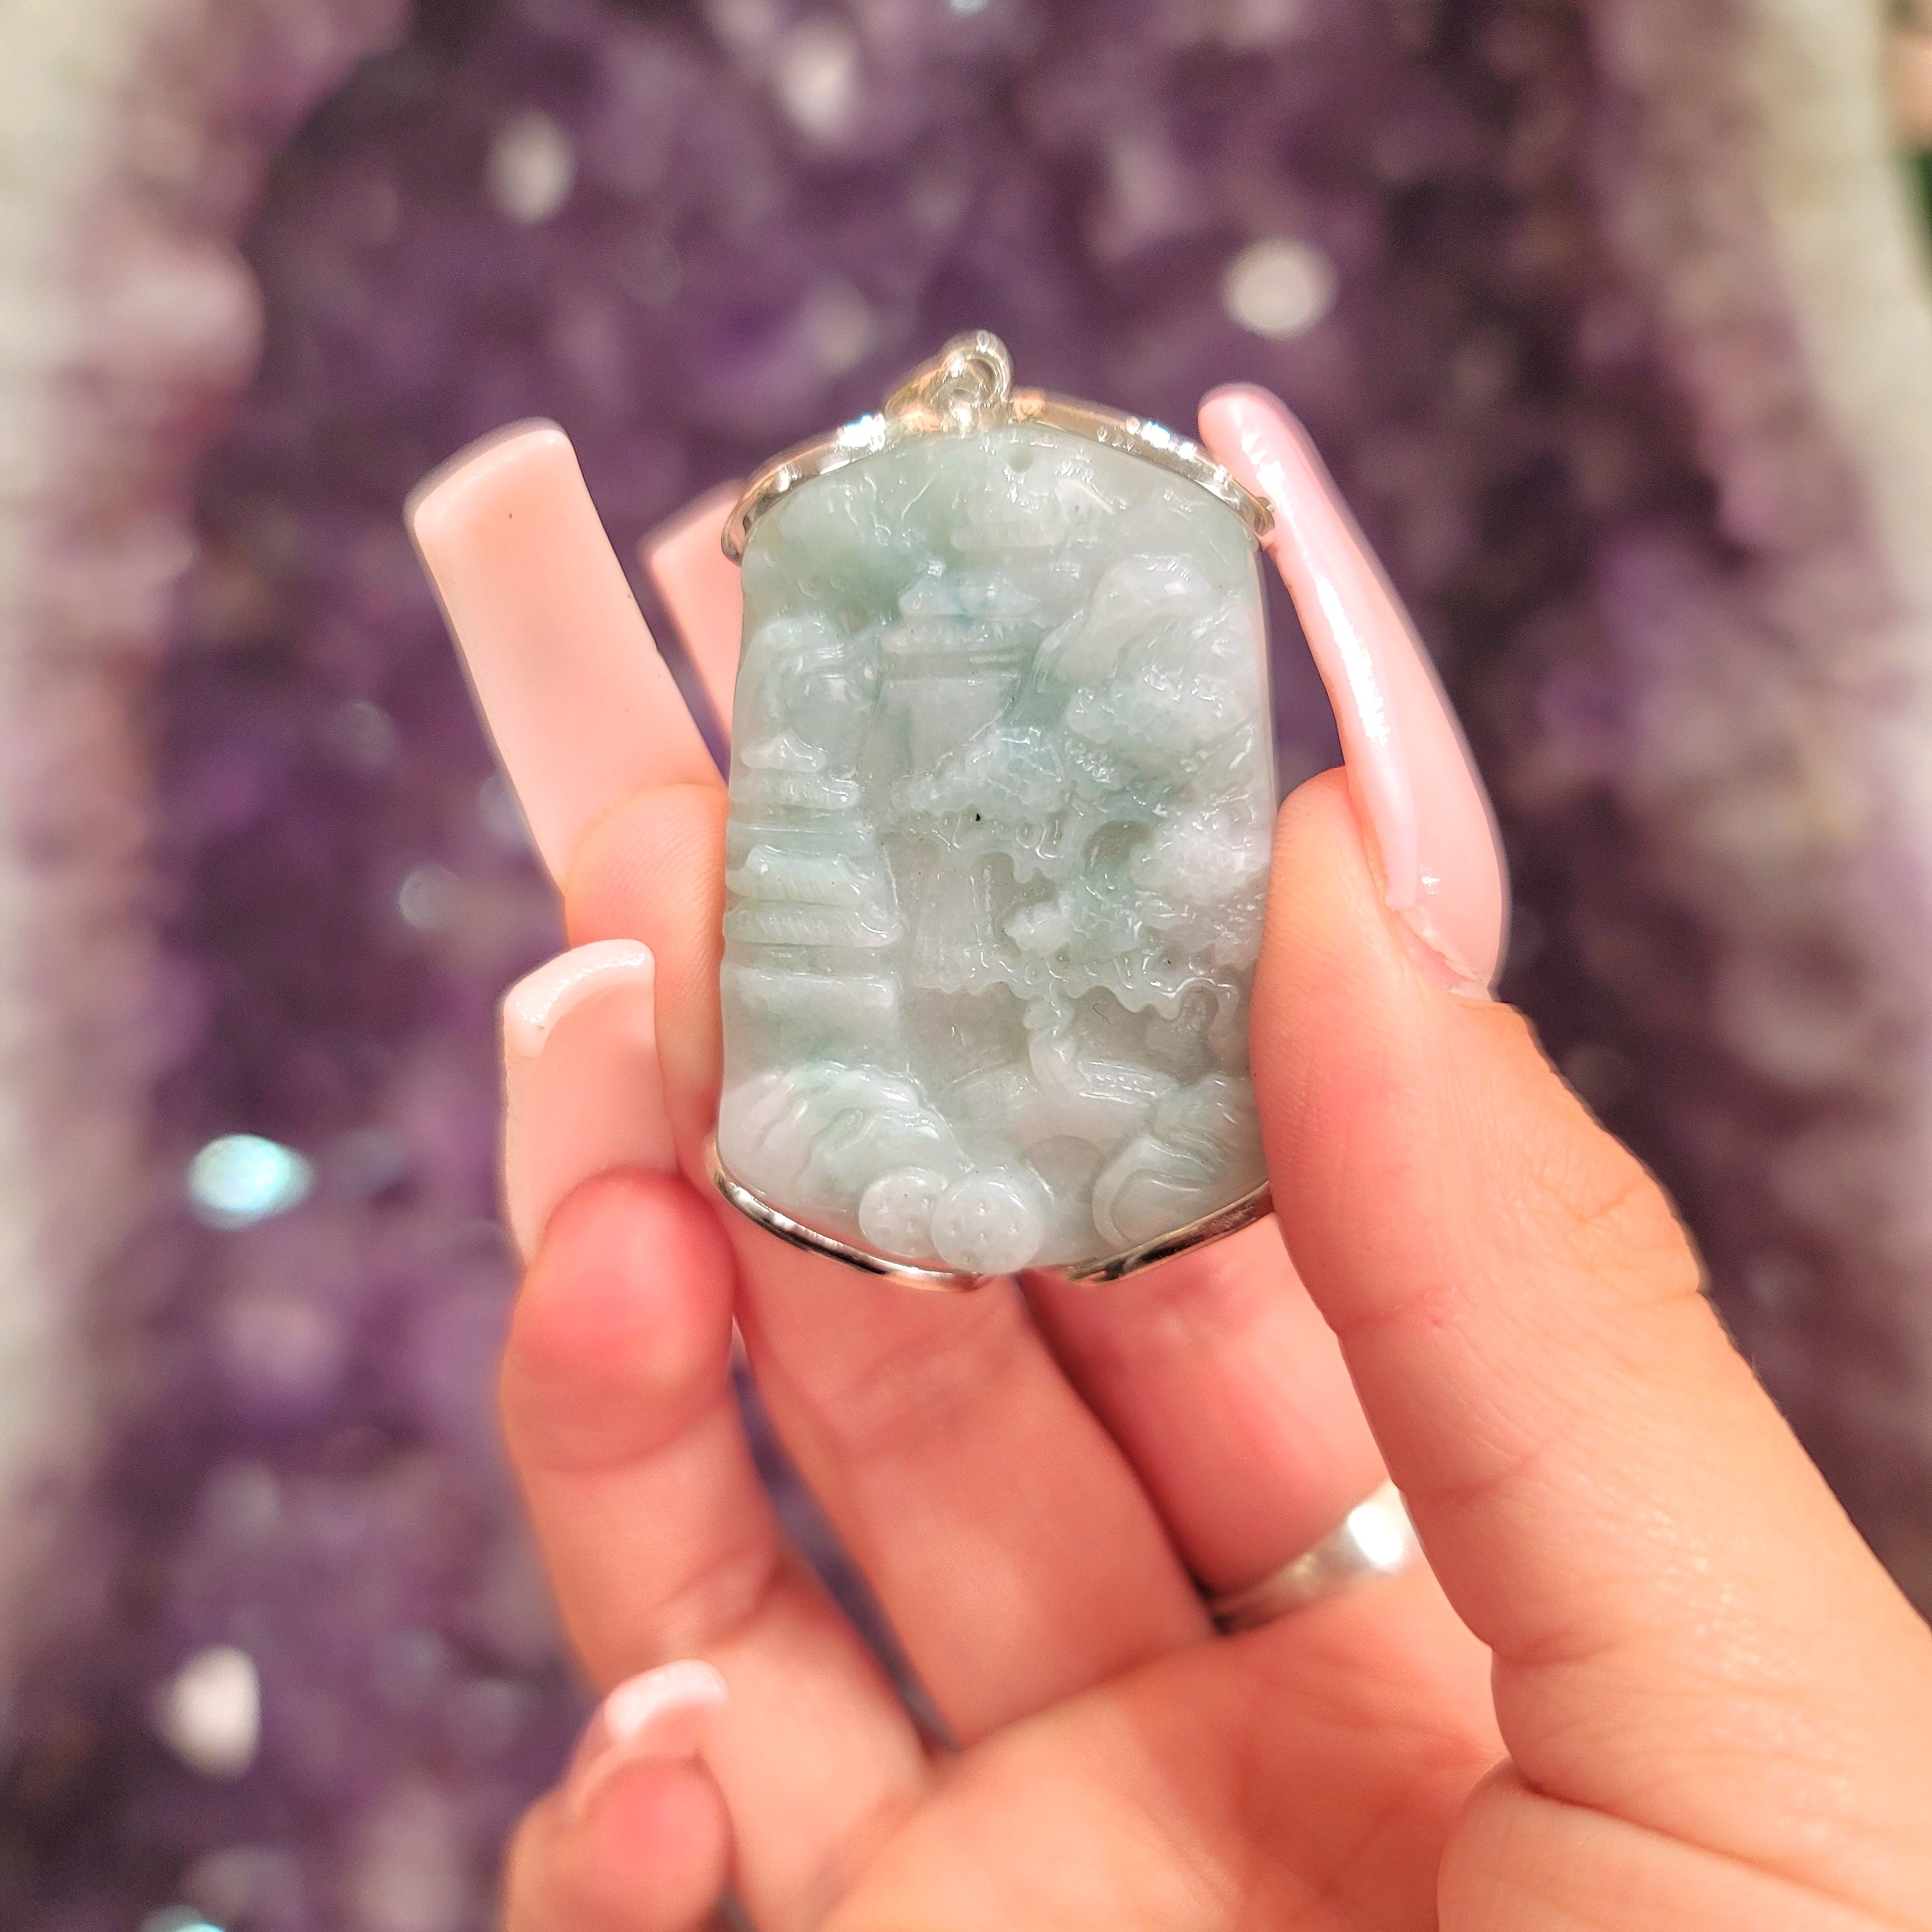 Jade Picture of Life Pendant for Good Luck, Prosperity and Serenity